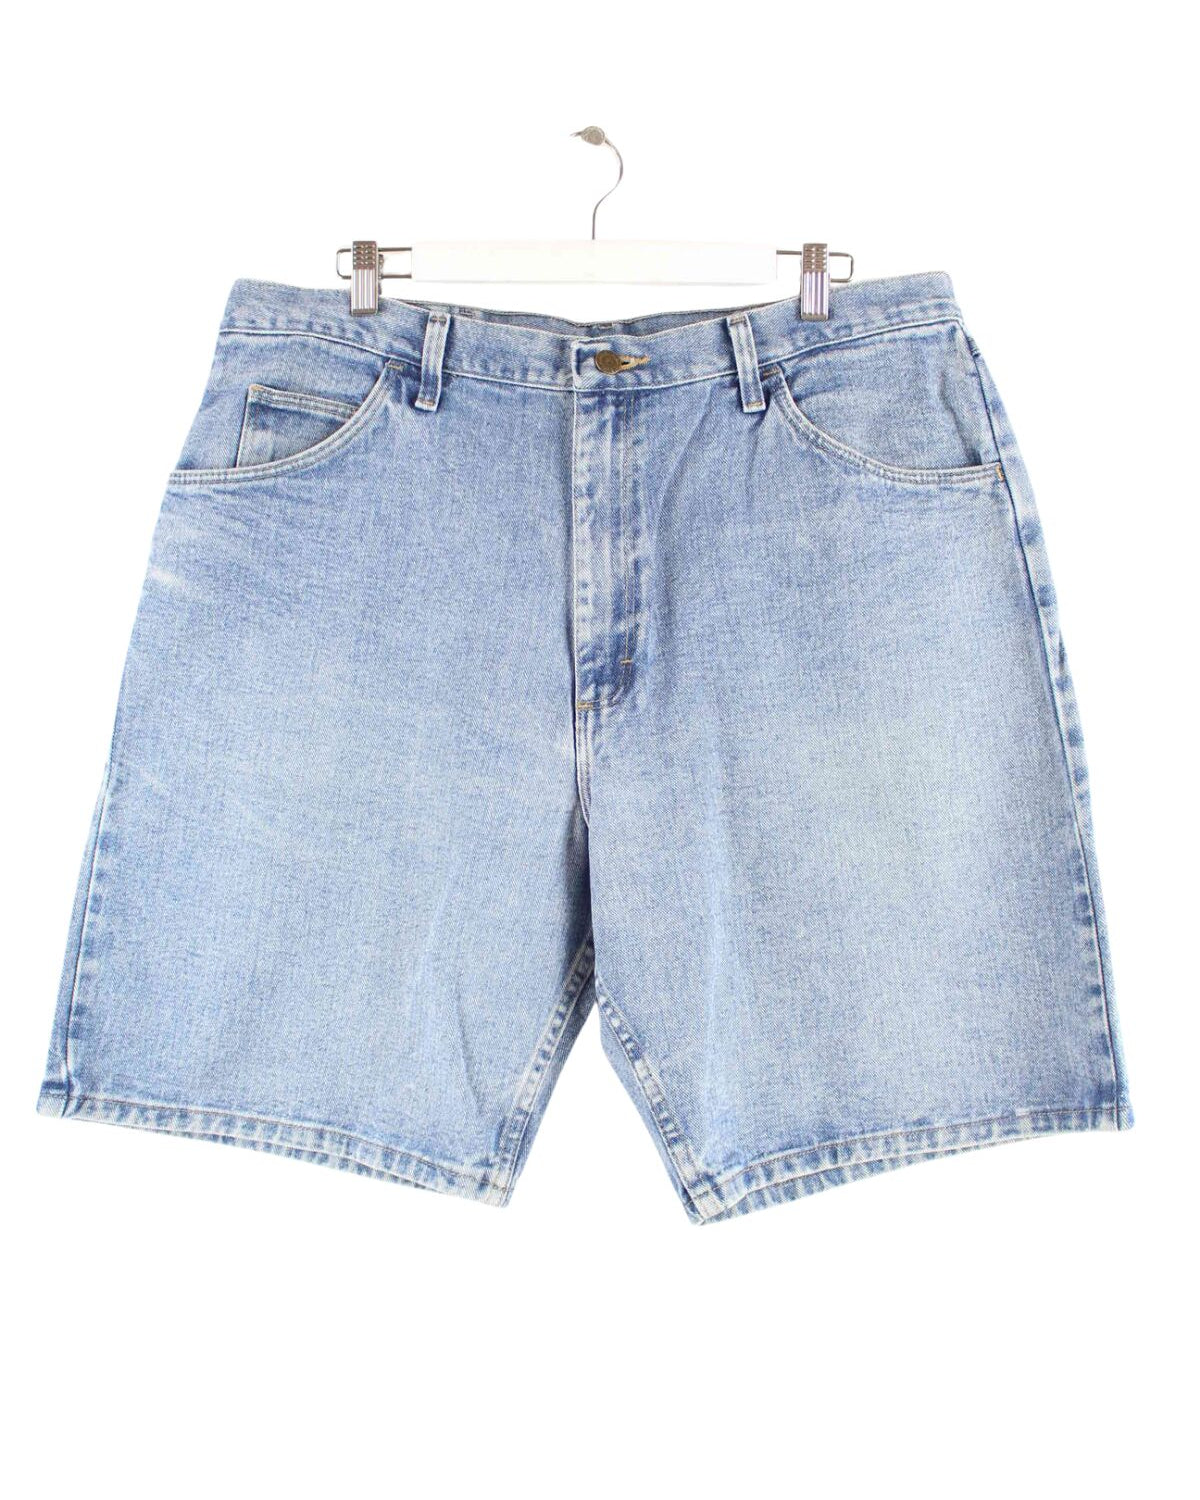 Wrangler Relaxed Fit Jeans Shorts Blau W38 (front image)